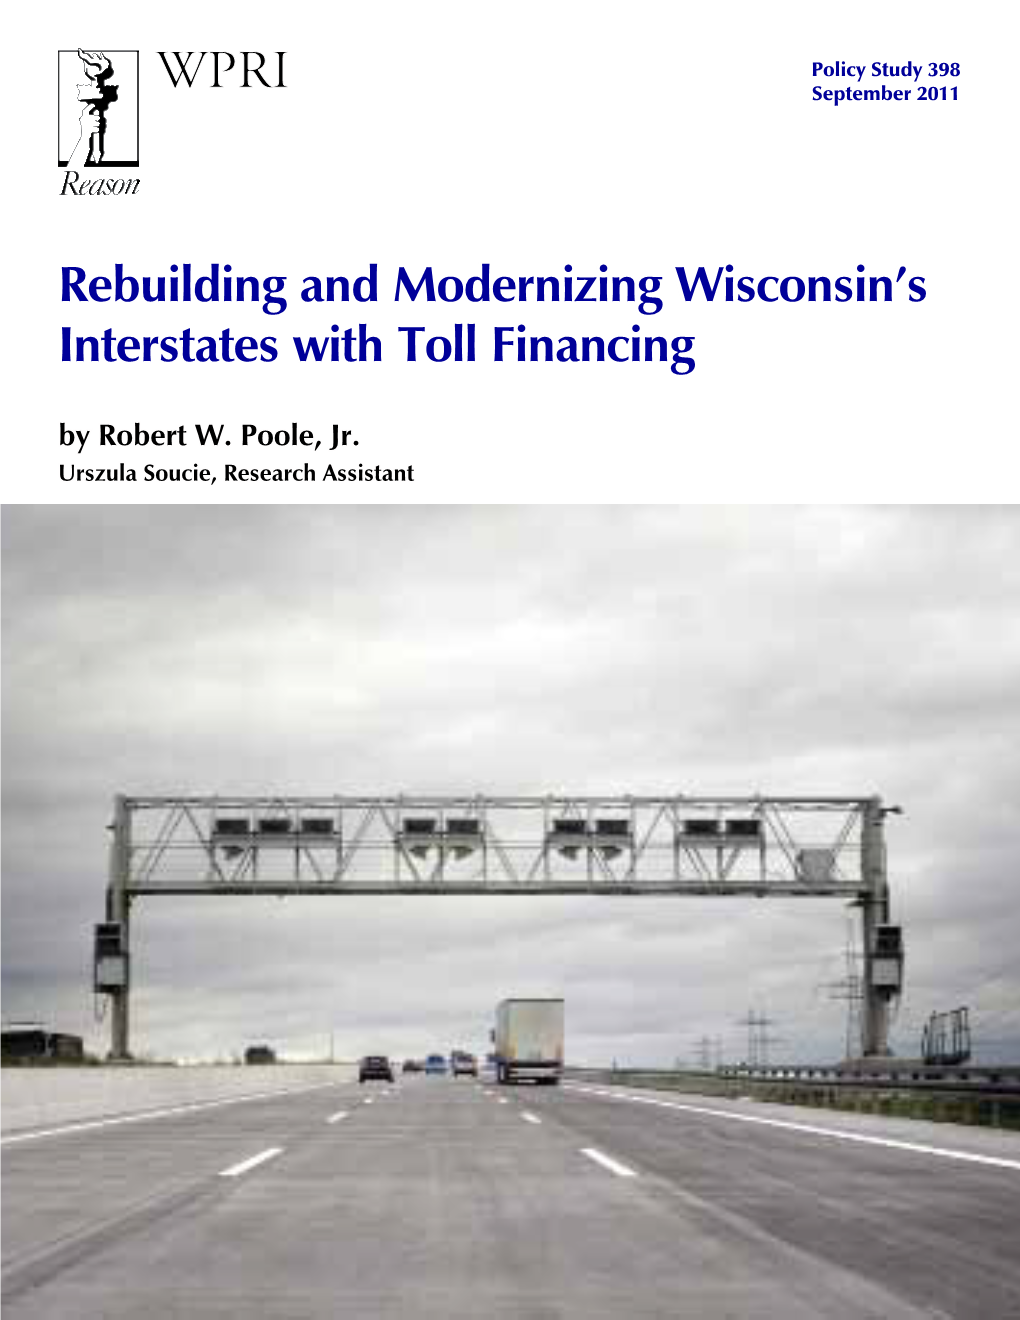 Rebuilding and Modernizing Wisconsin's Interstates with Toll